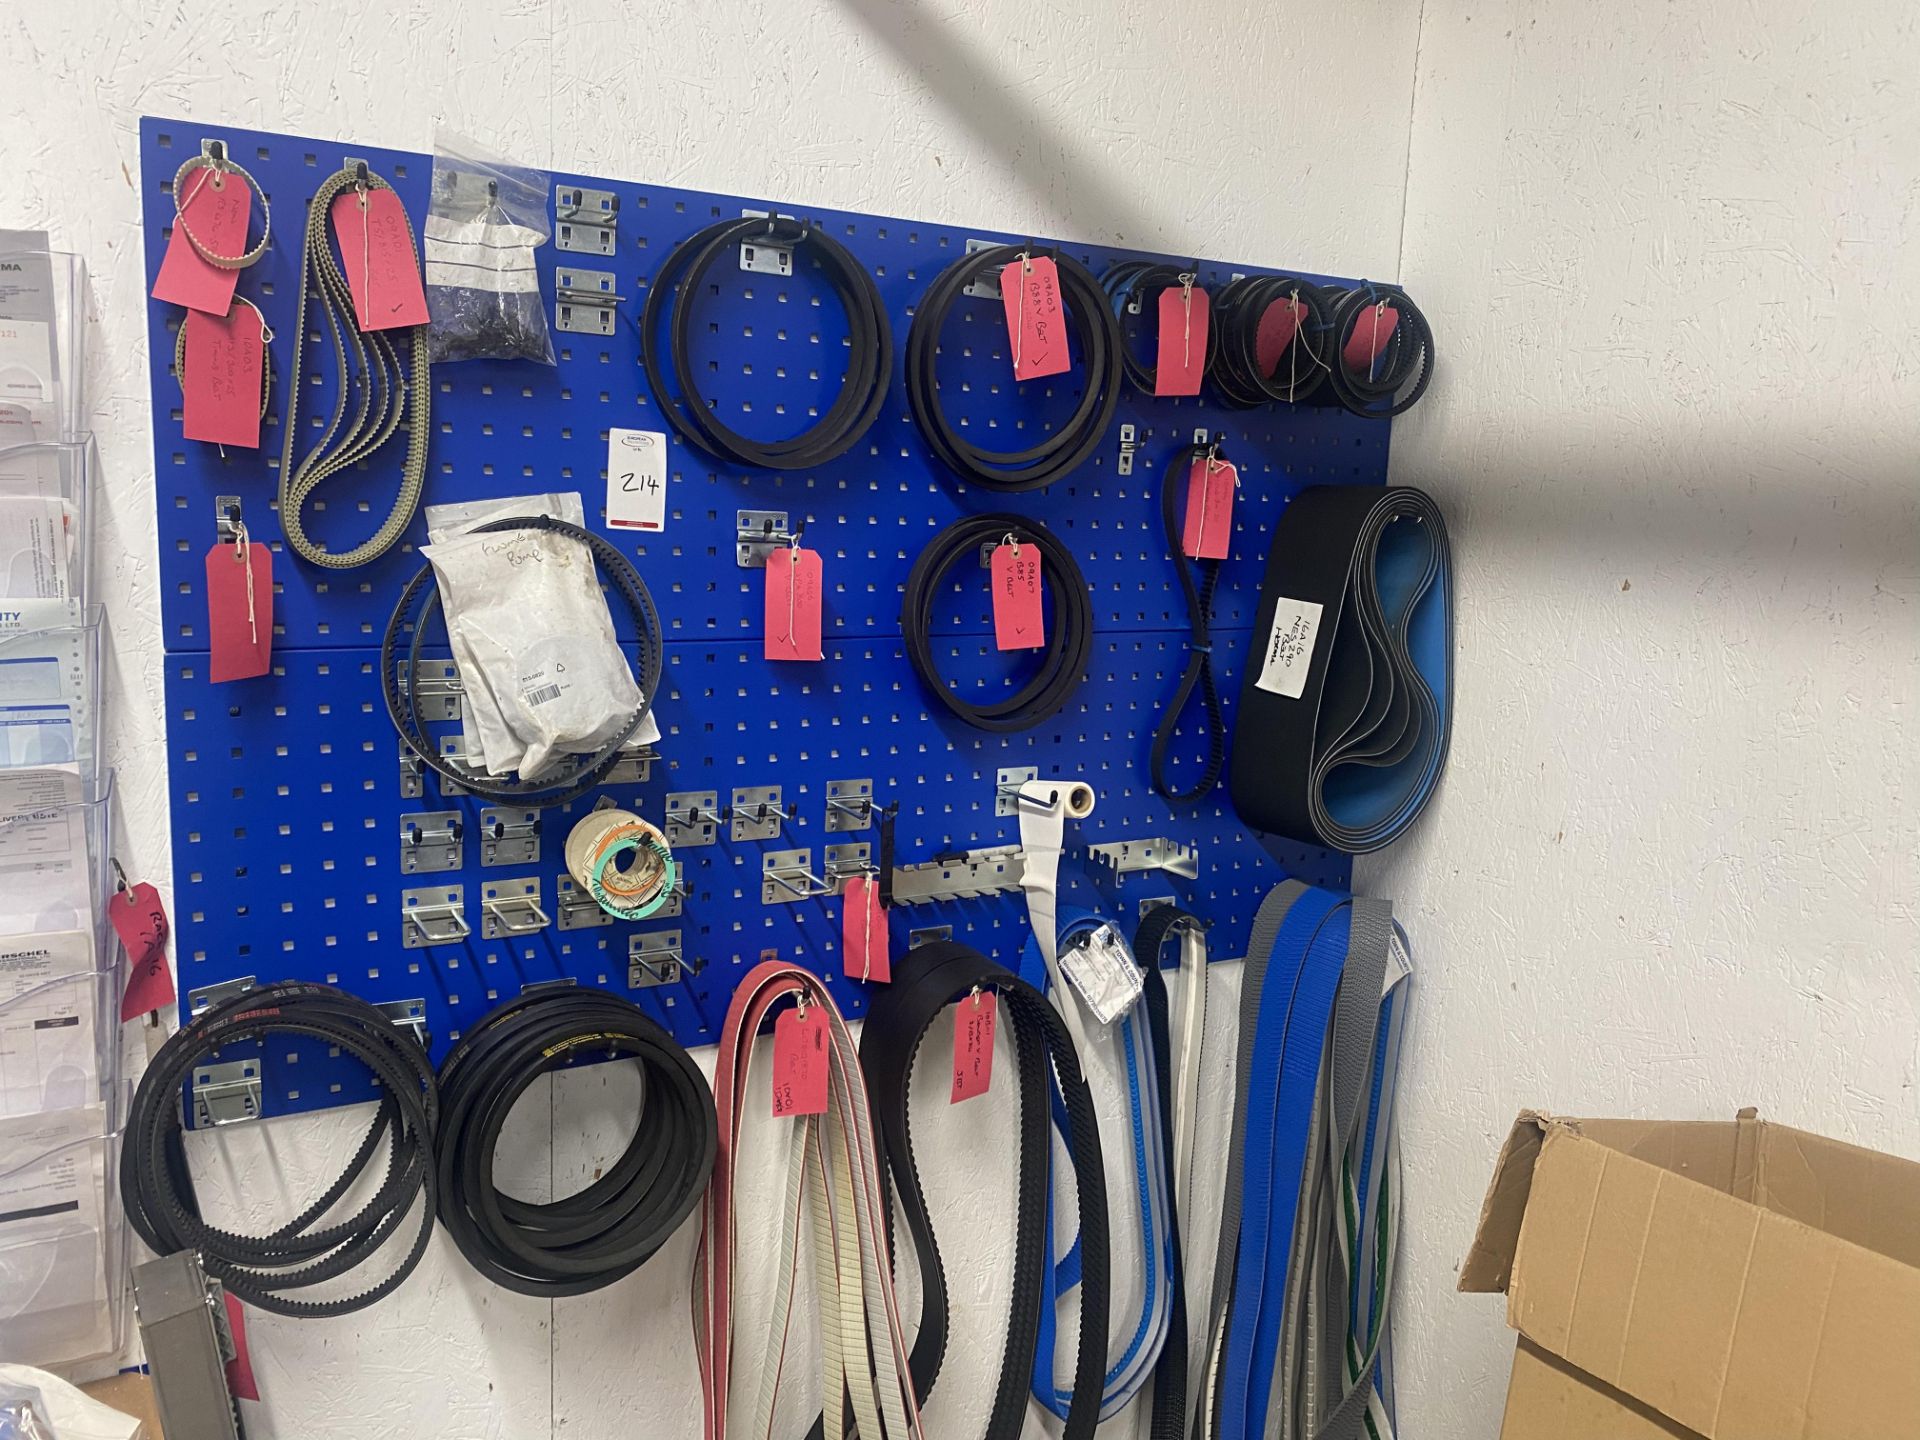 Wall mounted display boards and contents of various drive belts